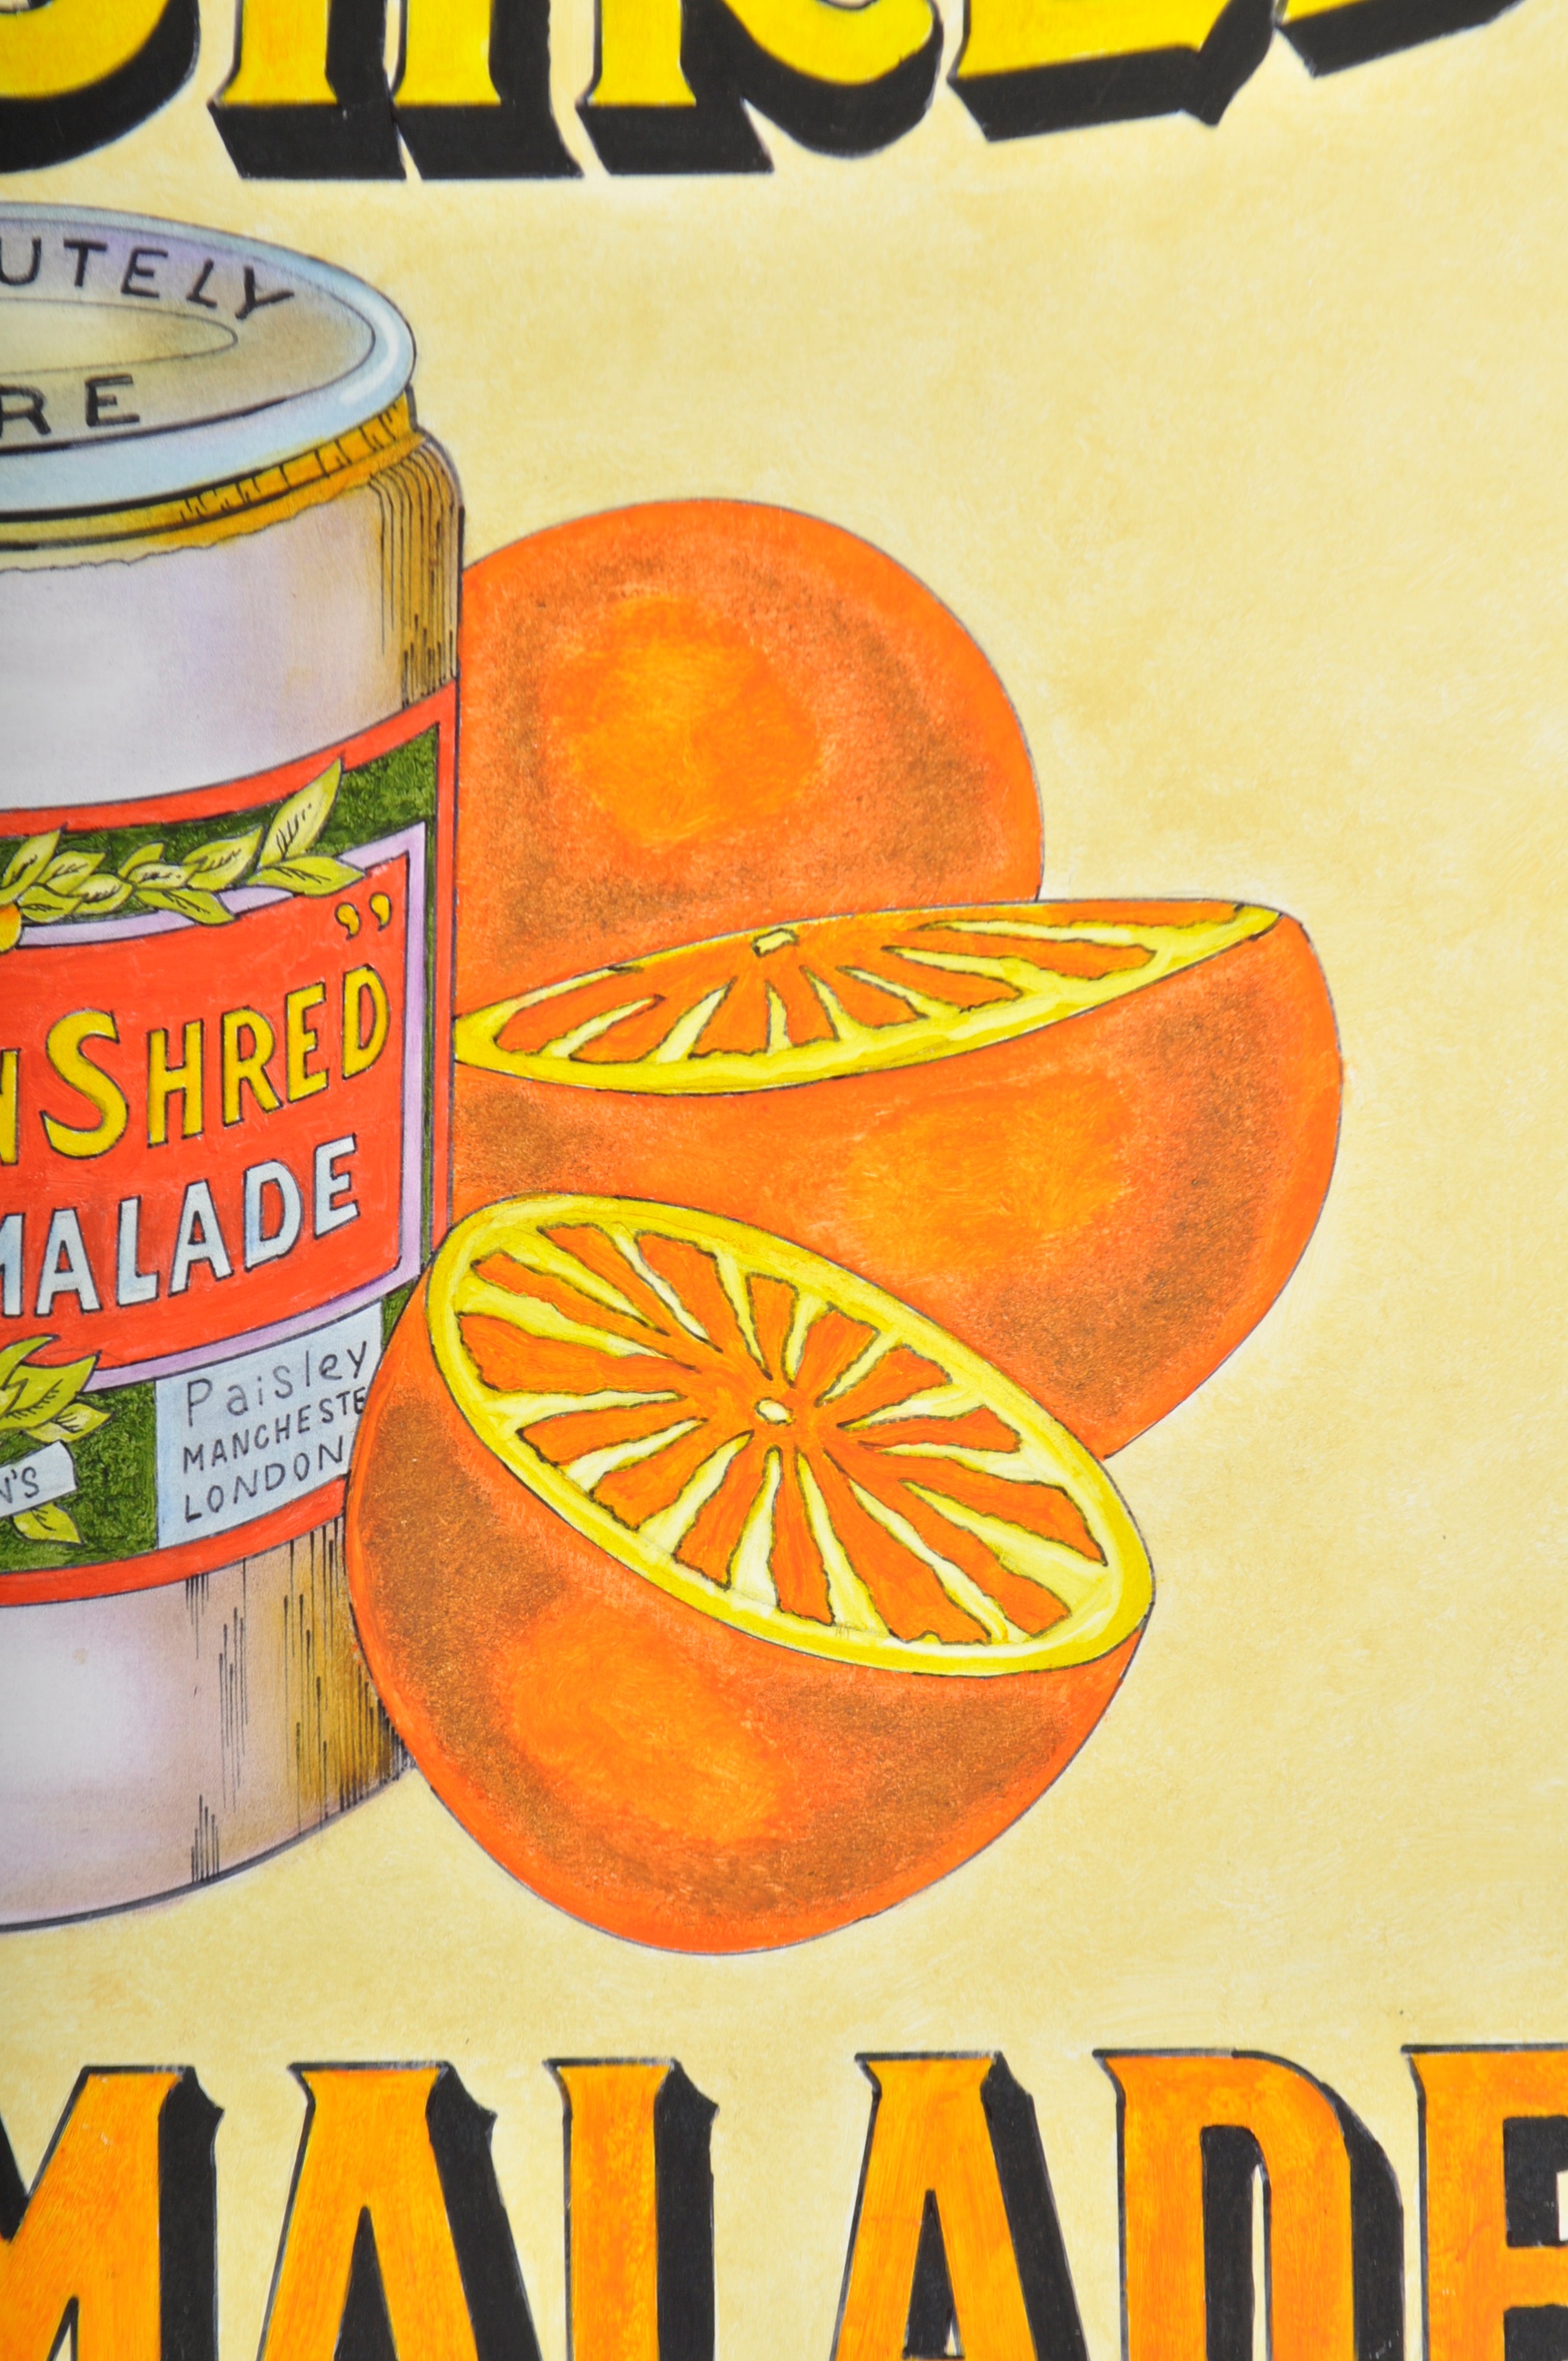 GOLDEN SHRED MARMALADE - LARGE OIL ON BOARD ADVERTISING SIGN - Image 5 of 7